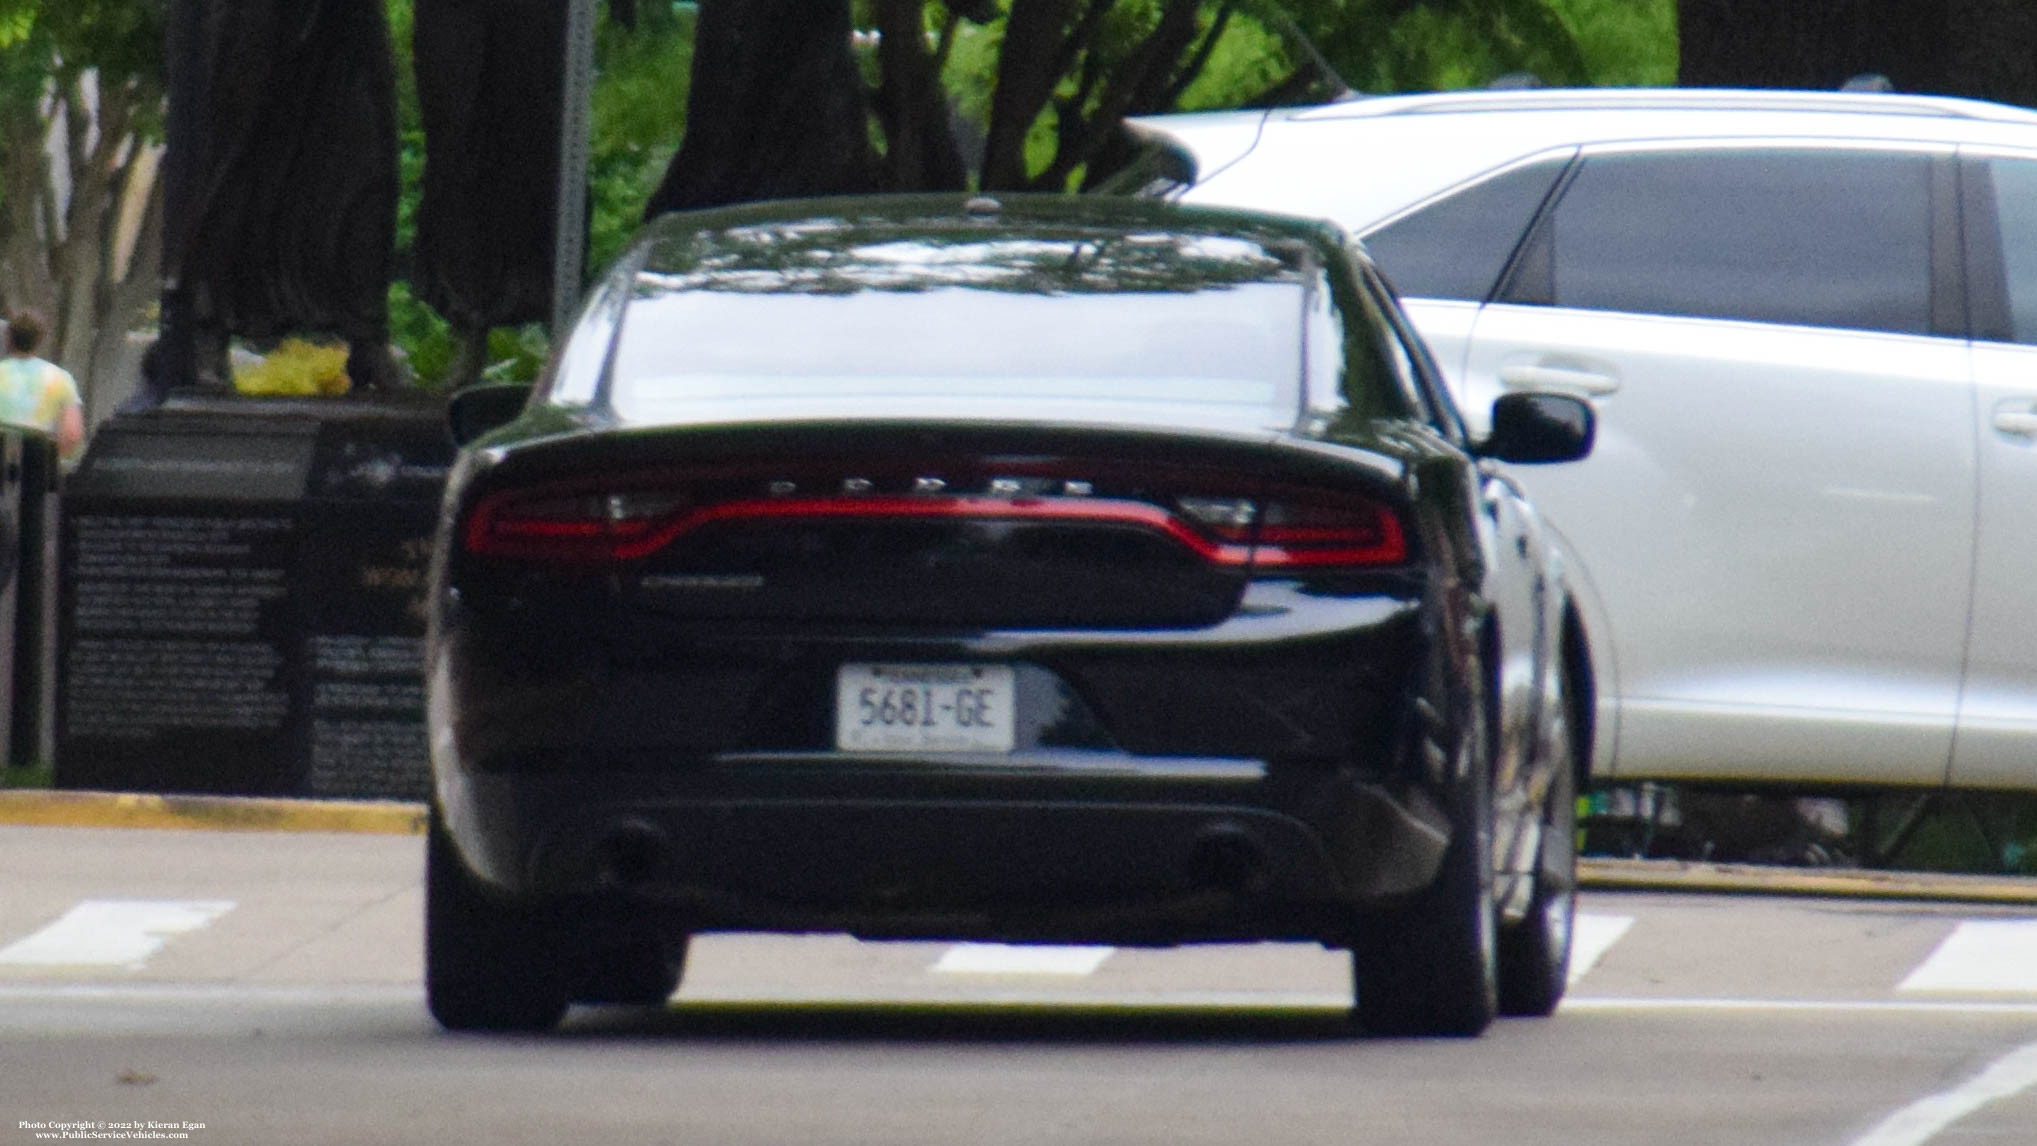 A photo  of Knoxville Police
            Unmarked Unit, a 2015-2019 Dodge Charger             taken by Kieran Egan